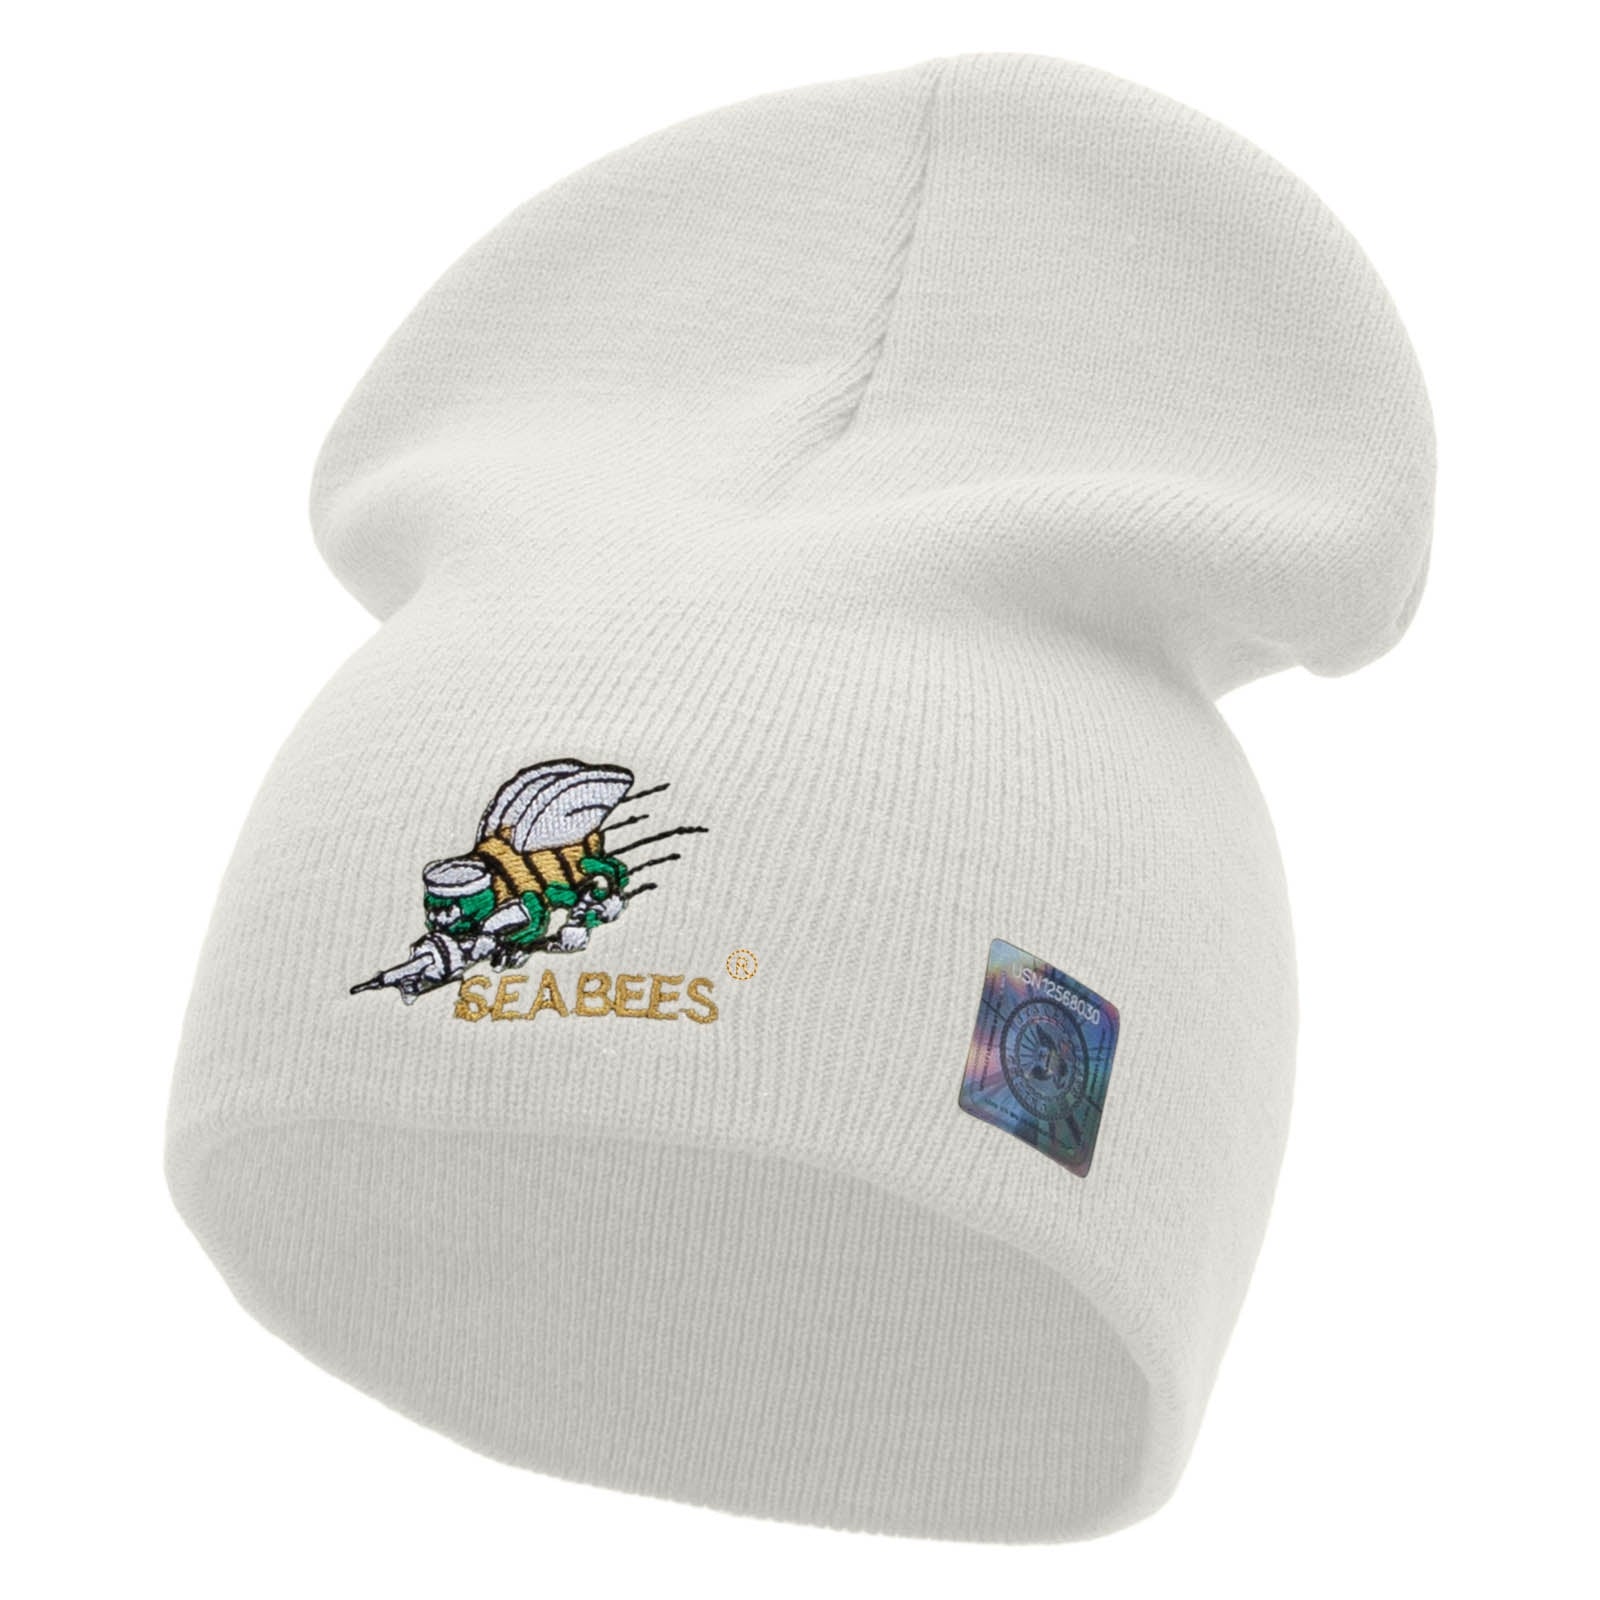 Licensed Navy Seabees Embroidered Short Beanie Made in USA - White OSFM